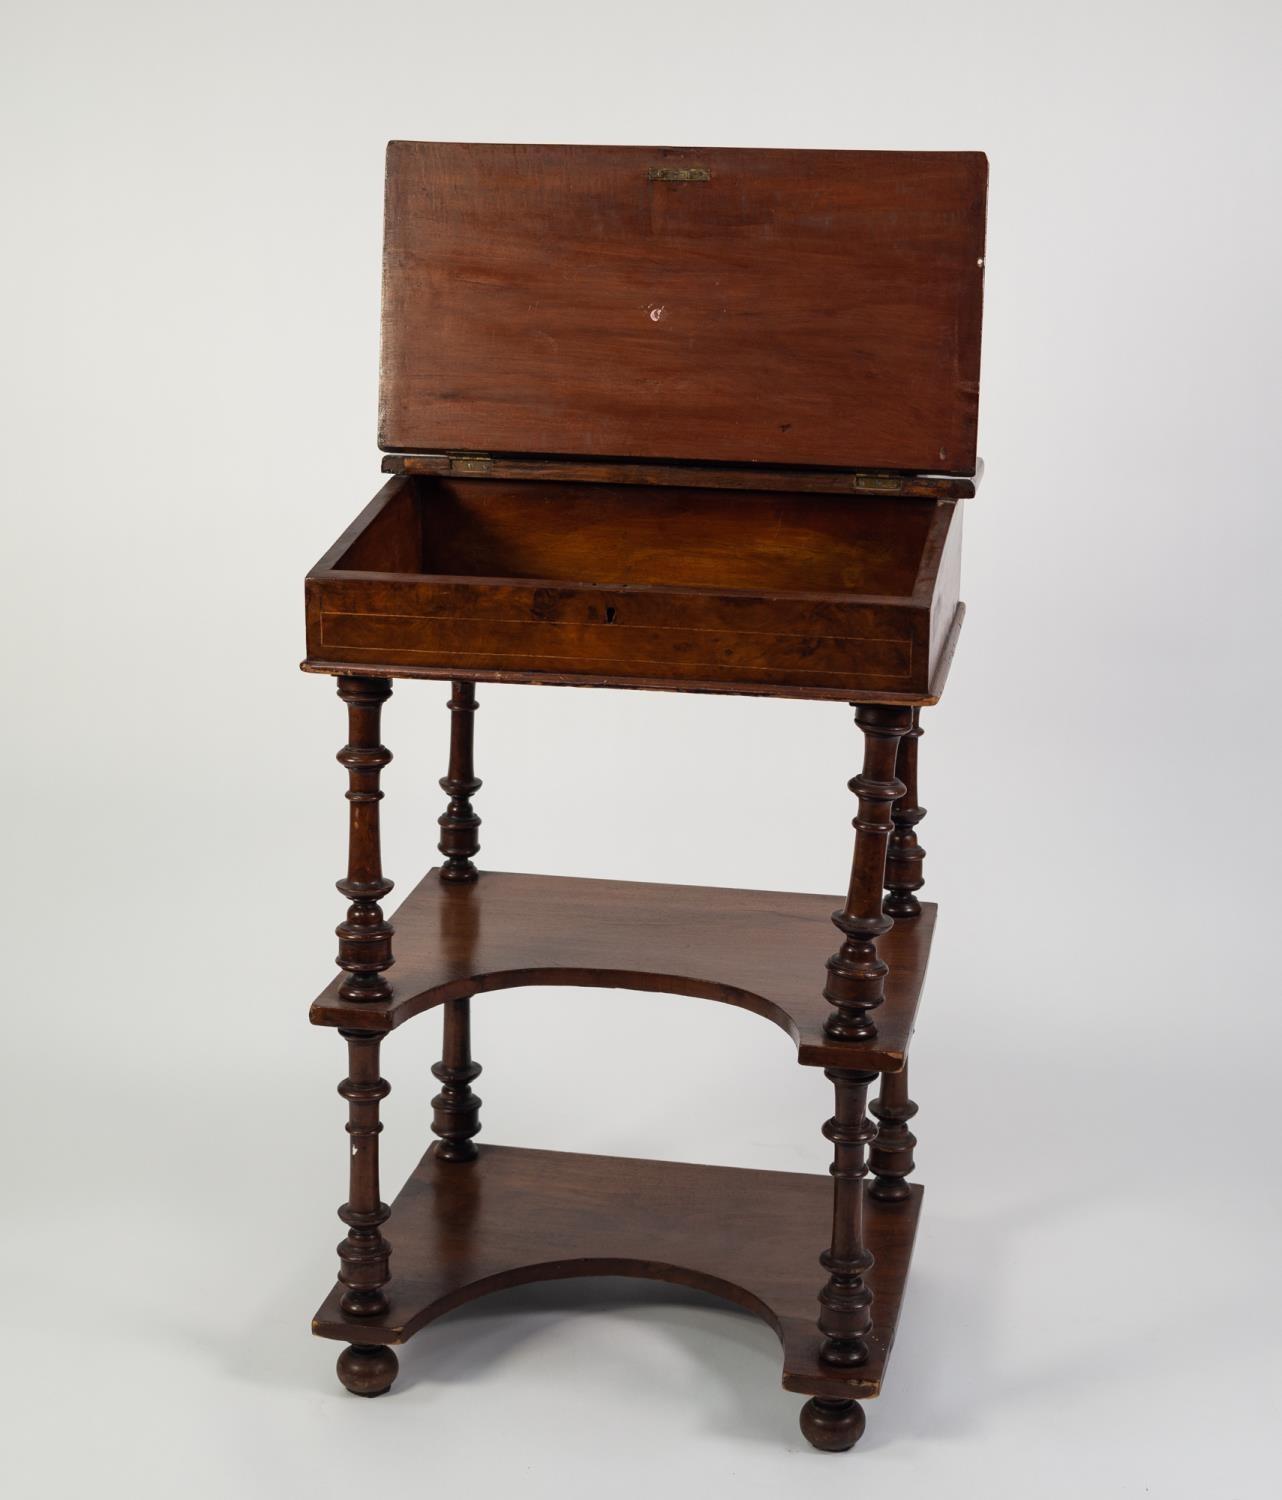 VICTORIAN LINE INLAID AND FIGURED WALNUT DAVENPORT STYLE DESK, the oblong stationery box with - Image 3 of 3